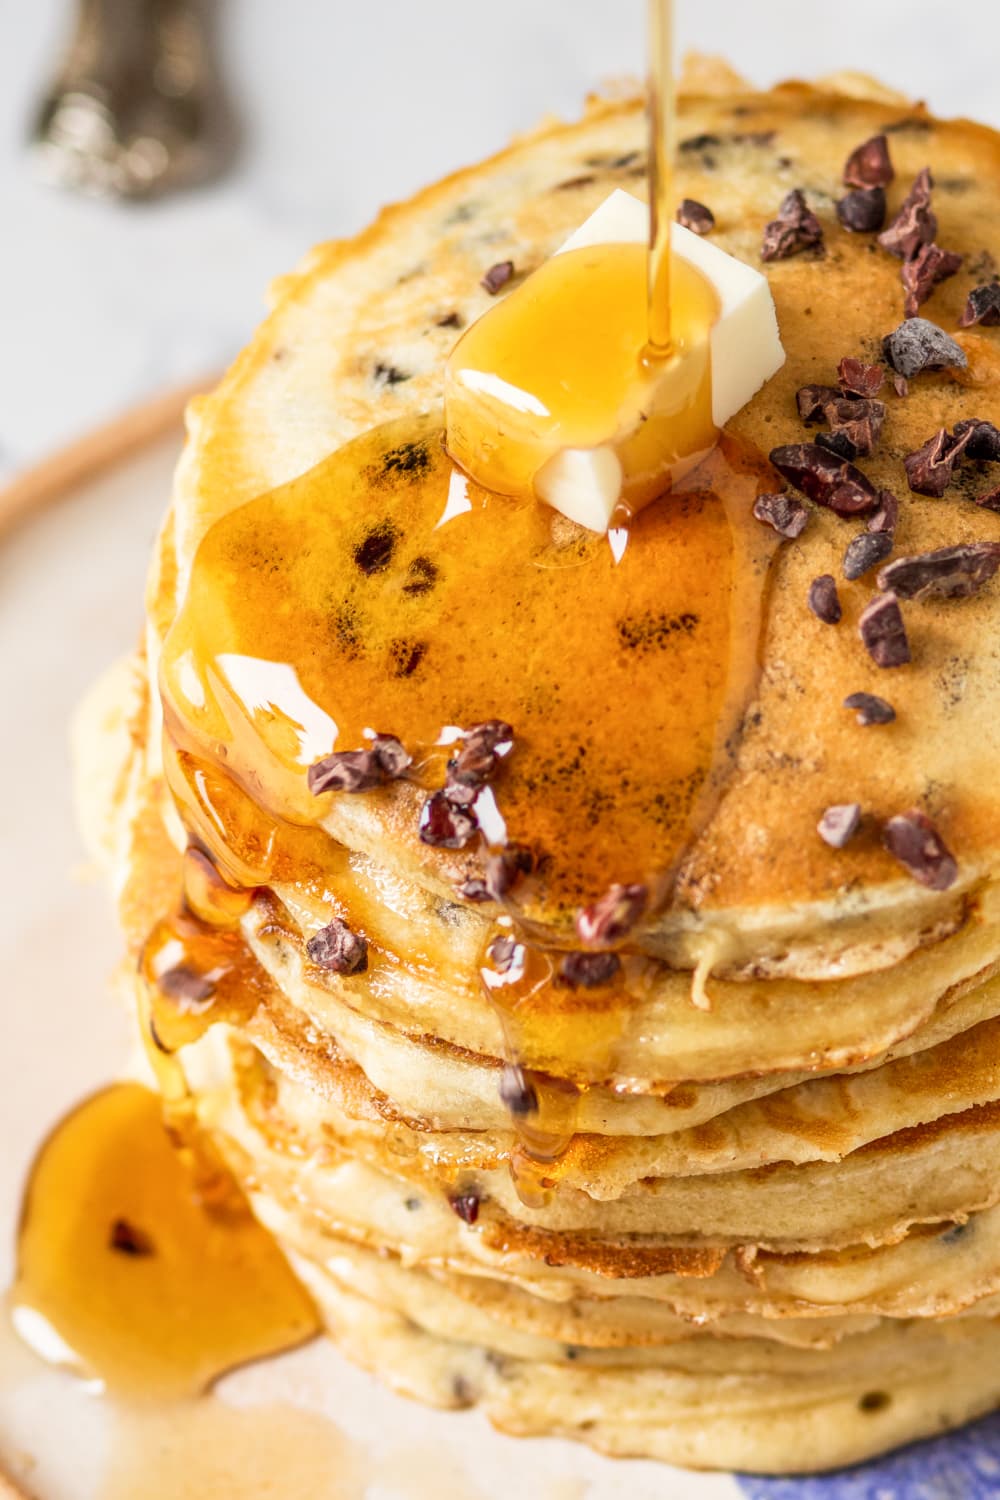 A close up view of a stack of nine chocolate chip pancakes on a white plate with a square slab of butter on the top pancake. Syrup is being poured on the pancakes, dripping down the side of the stack.